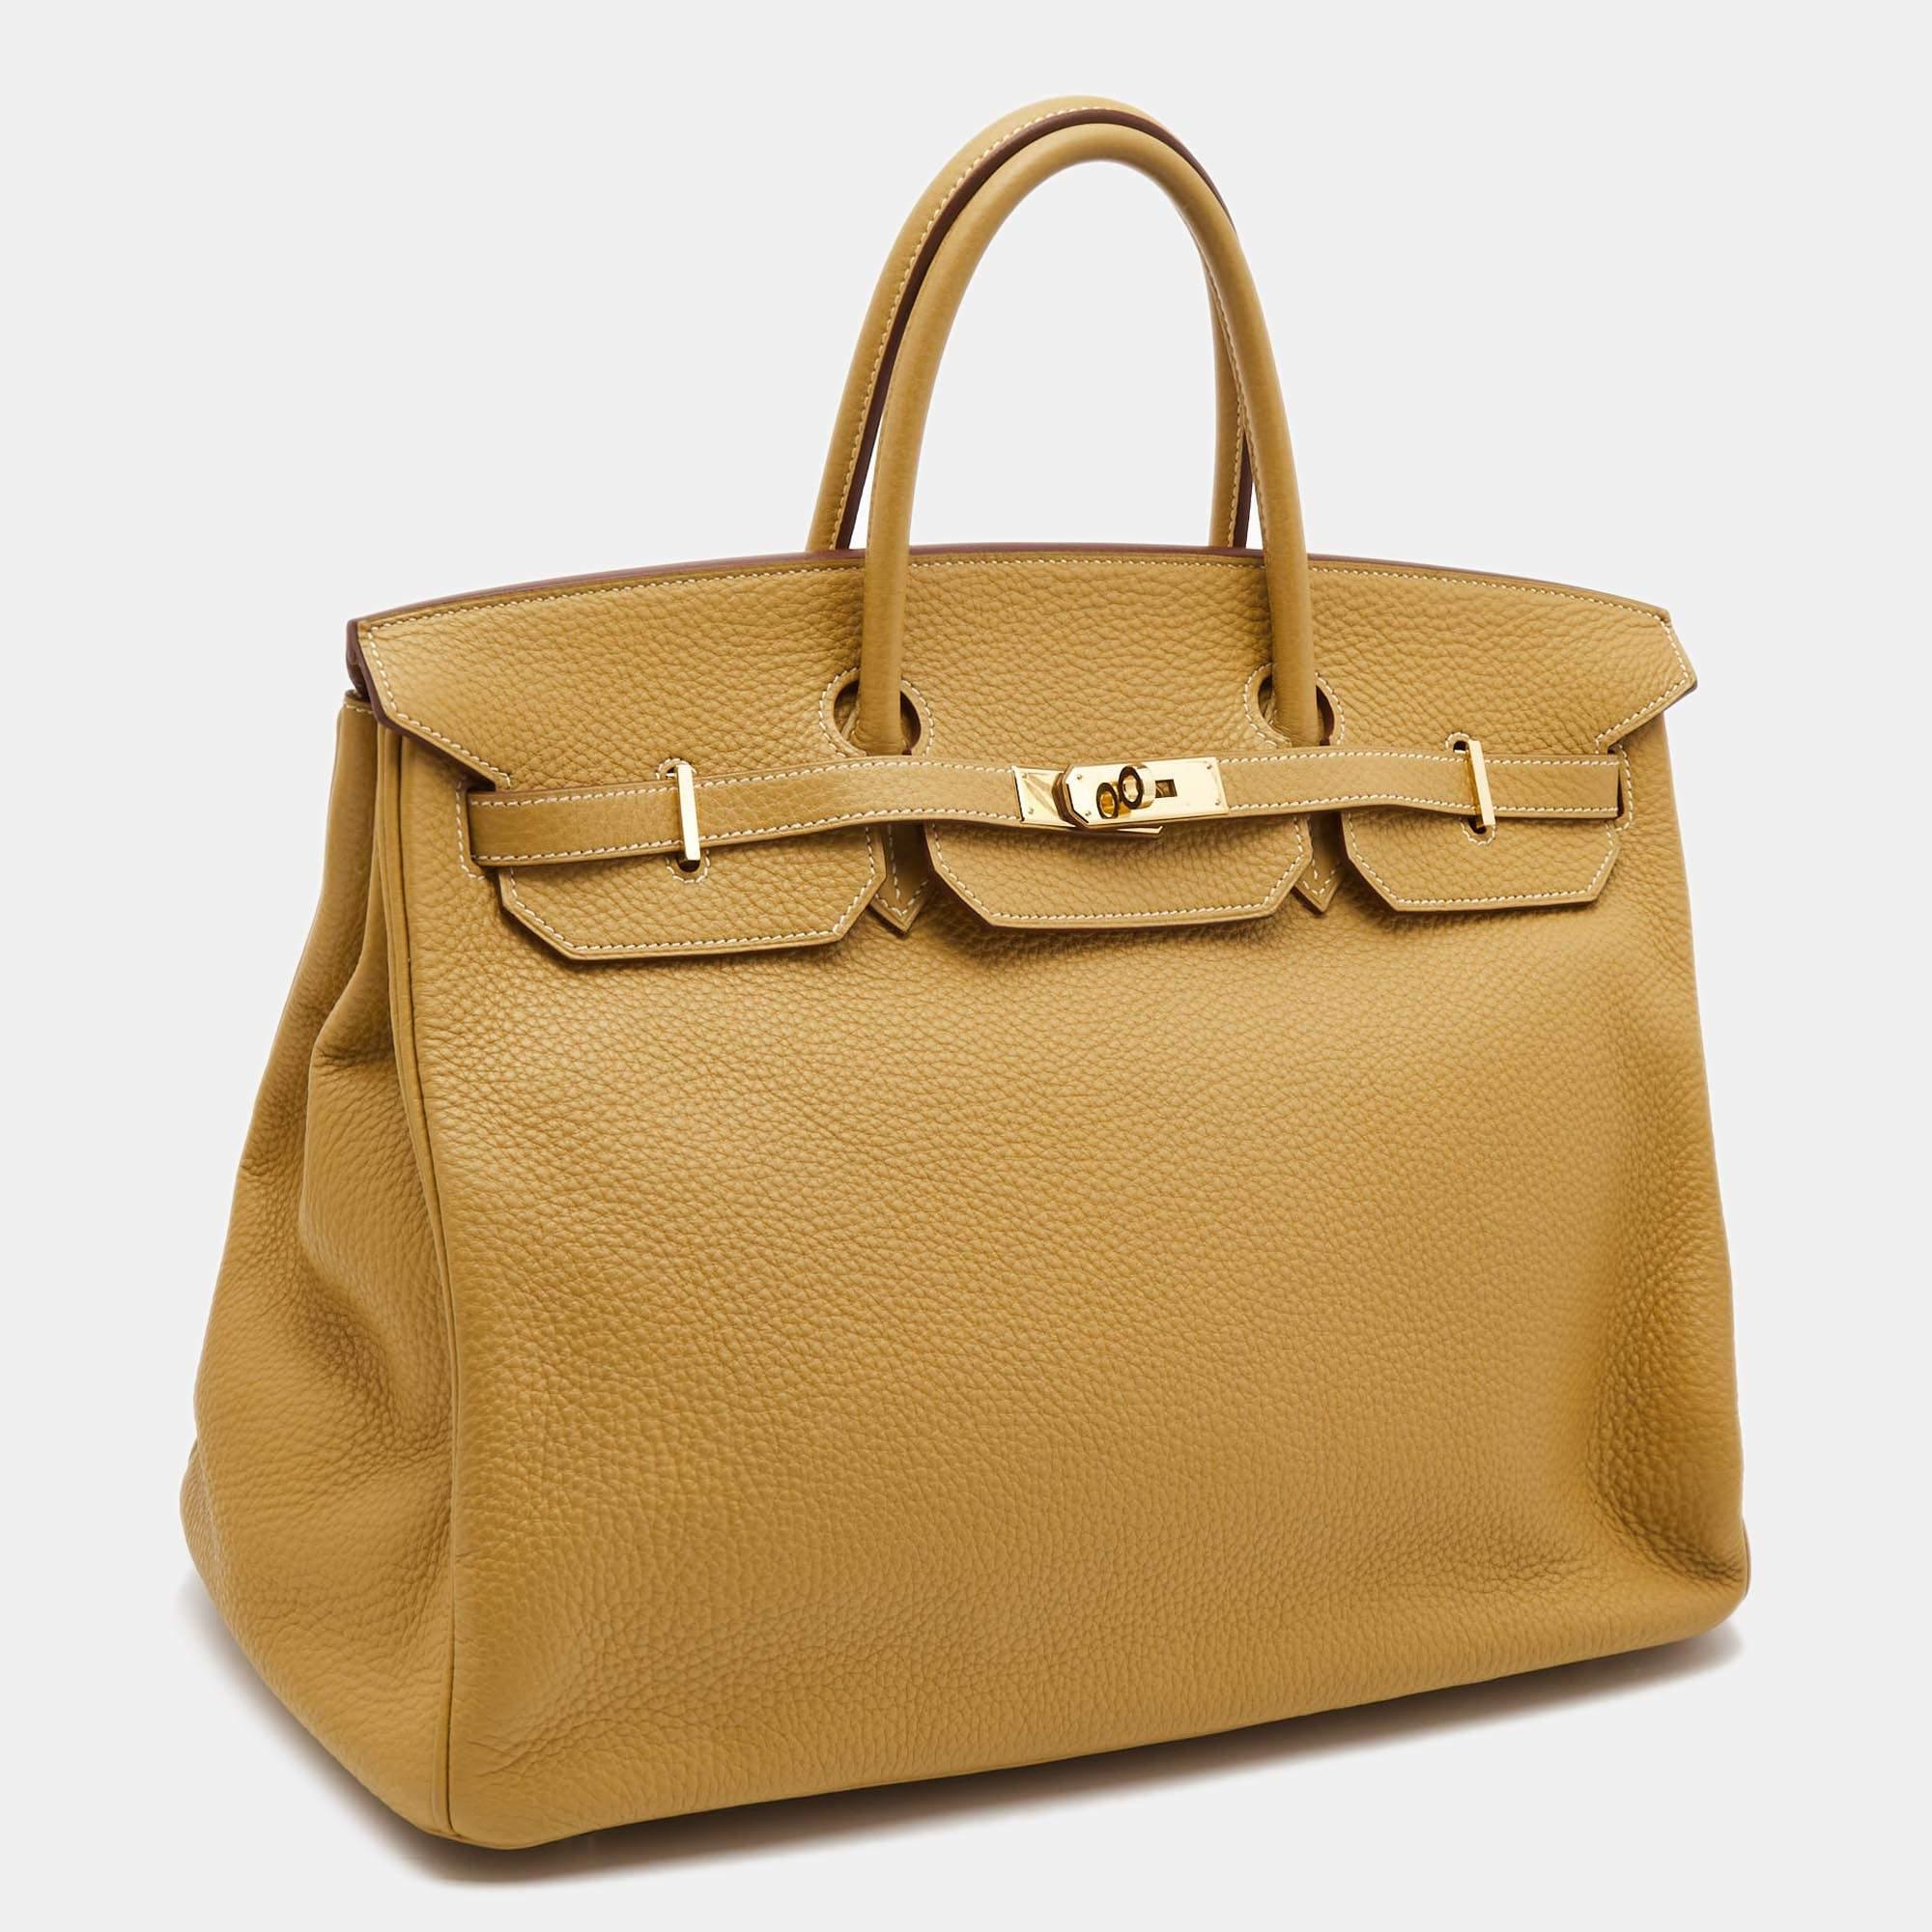 Hermes is known for its flawless craftsmanship and high quality. Hermes Birkin was inspired by Jane Birkin and is one of the most desired handbags in the world. A timeless classic that never goes out of style. Handcrafted from the highest quality of